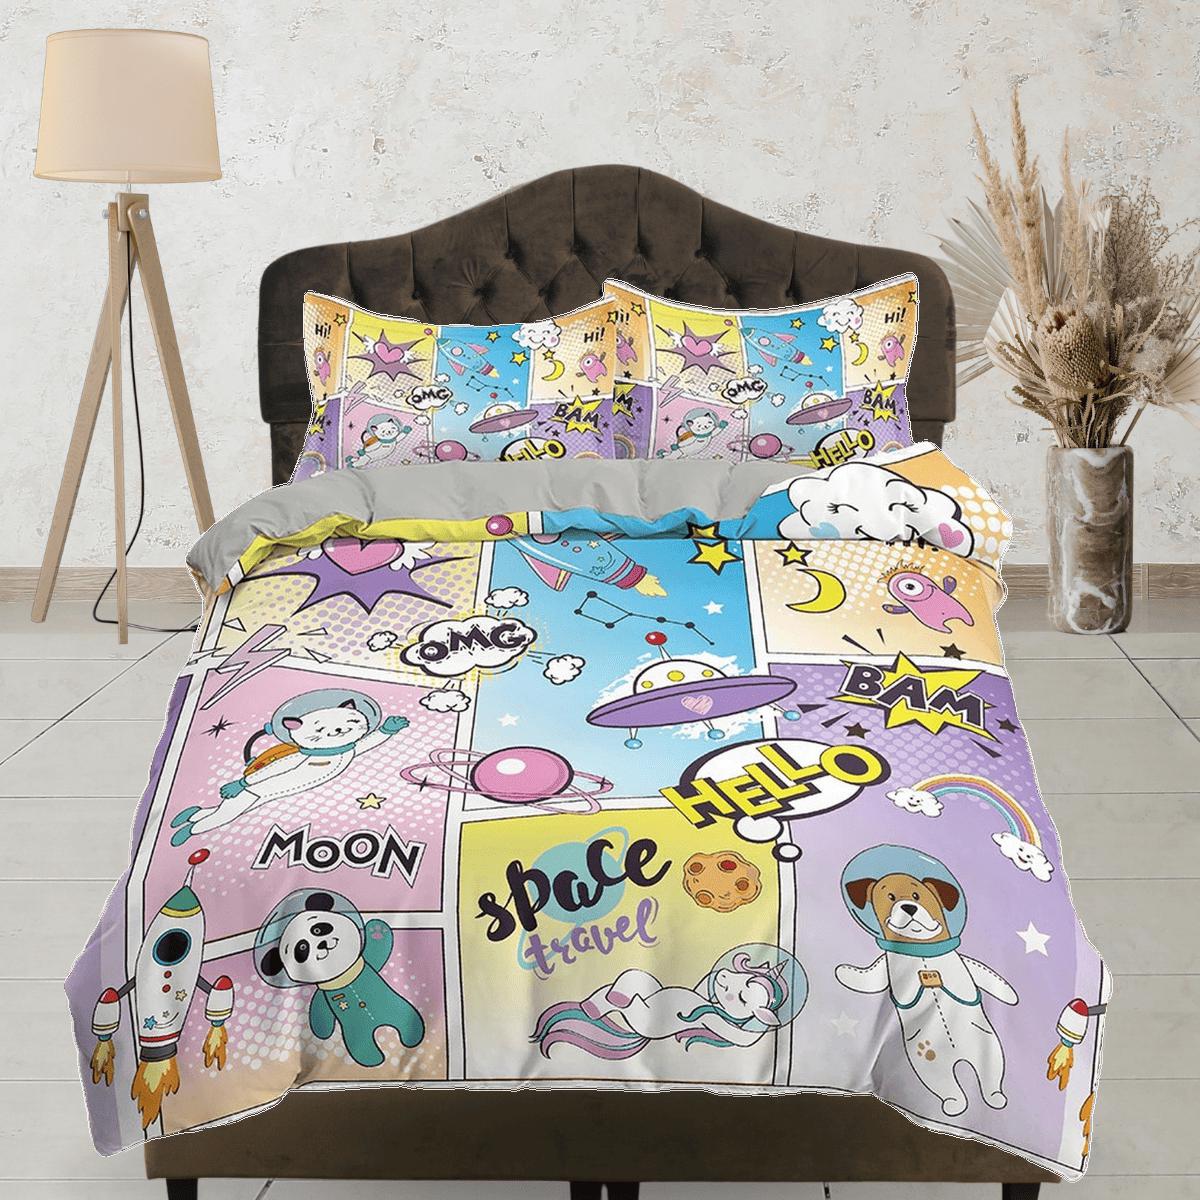 daintyduvet Astro panda and bear comics pastel colored toddler bedding, unique duvet cover kids, crib bedding, baby zipper bedding, king queen full twin